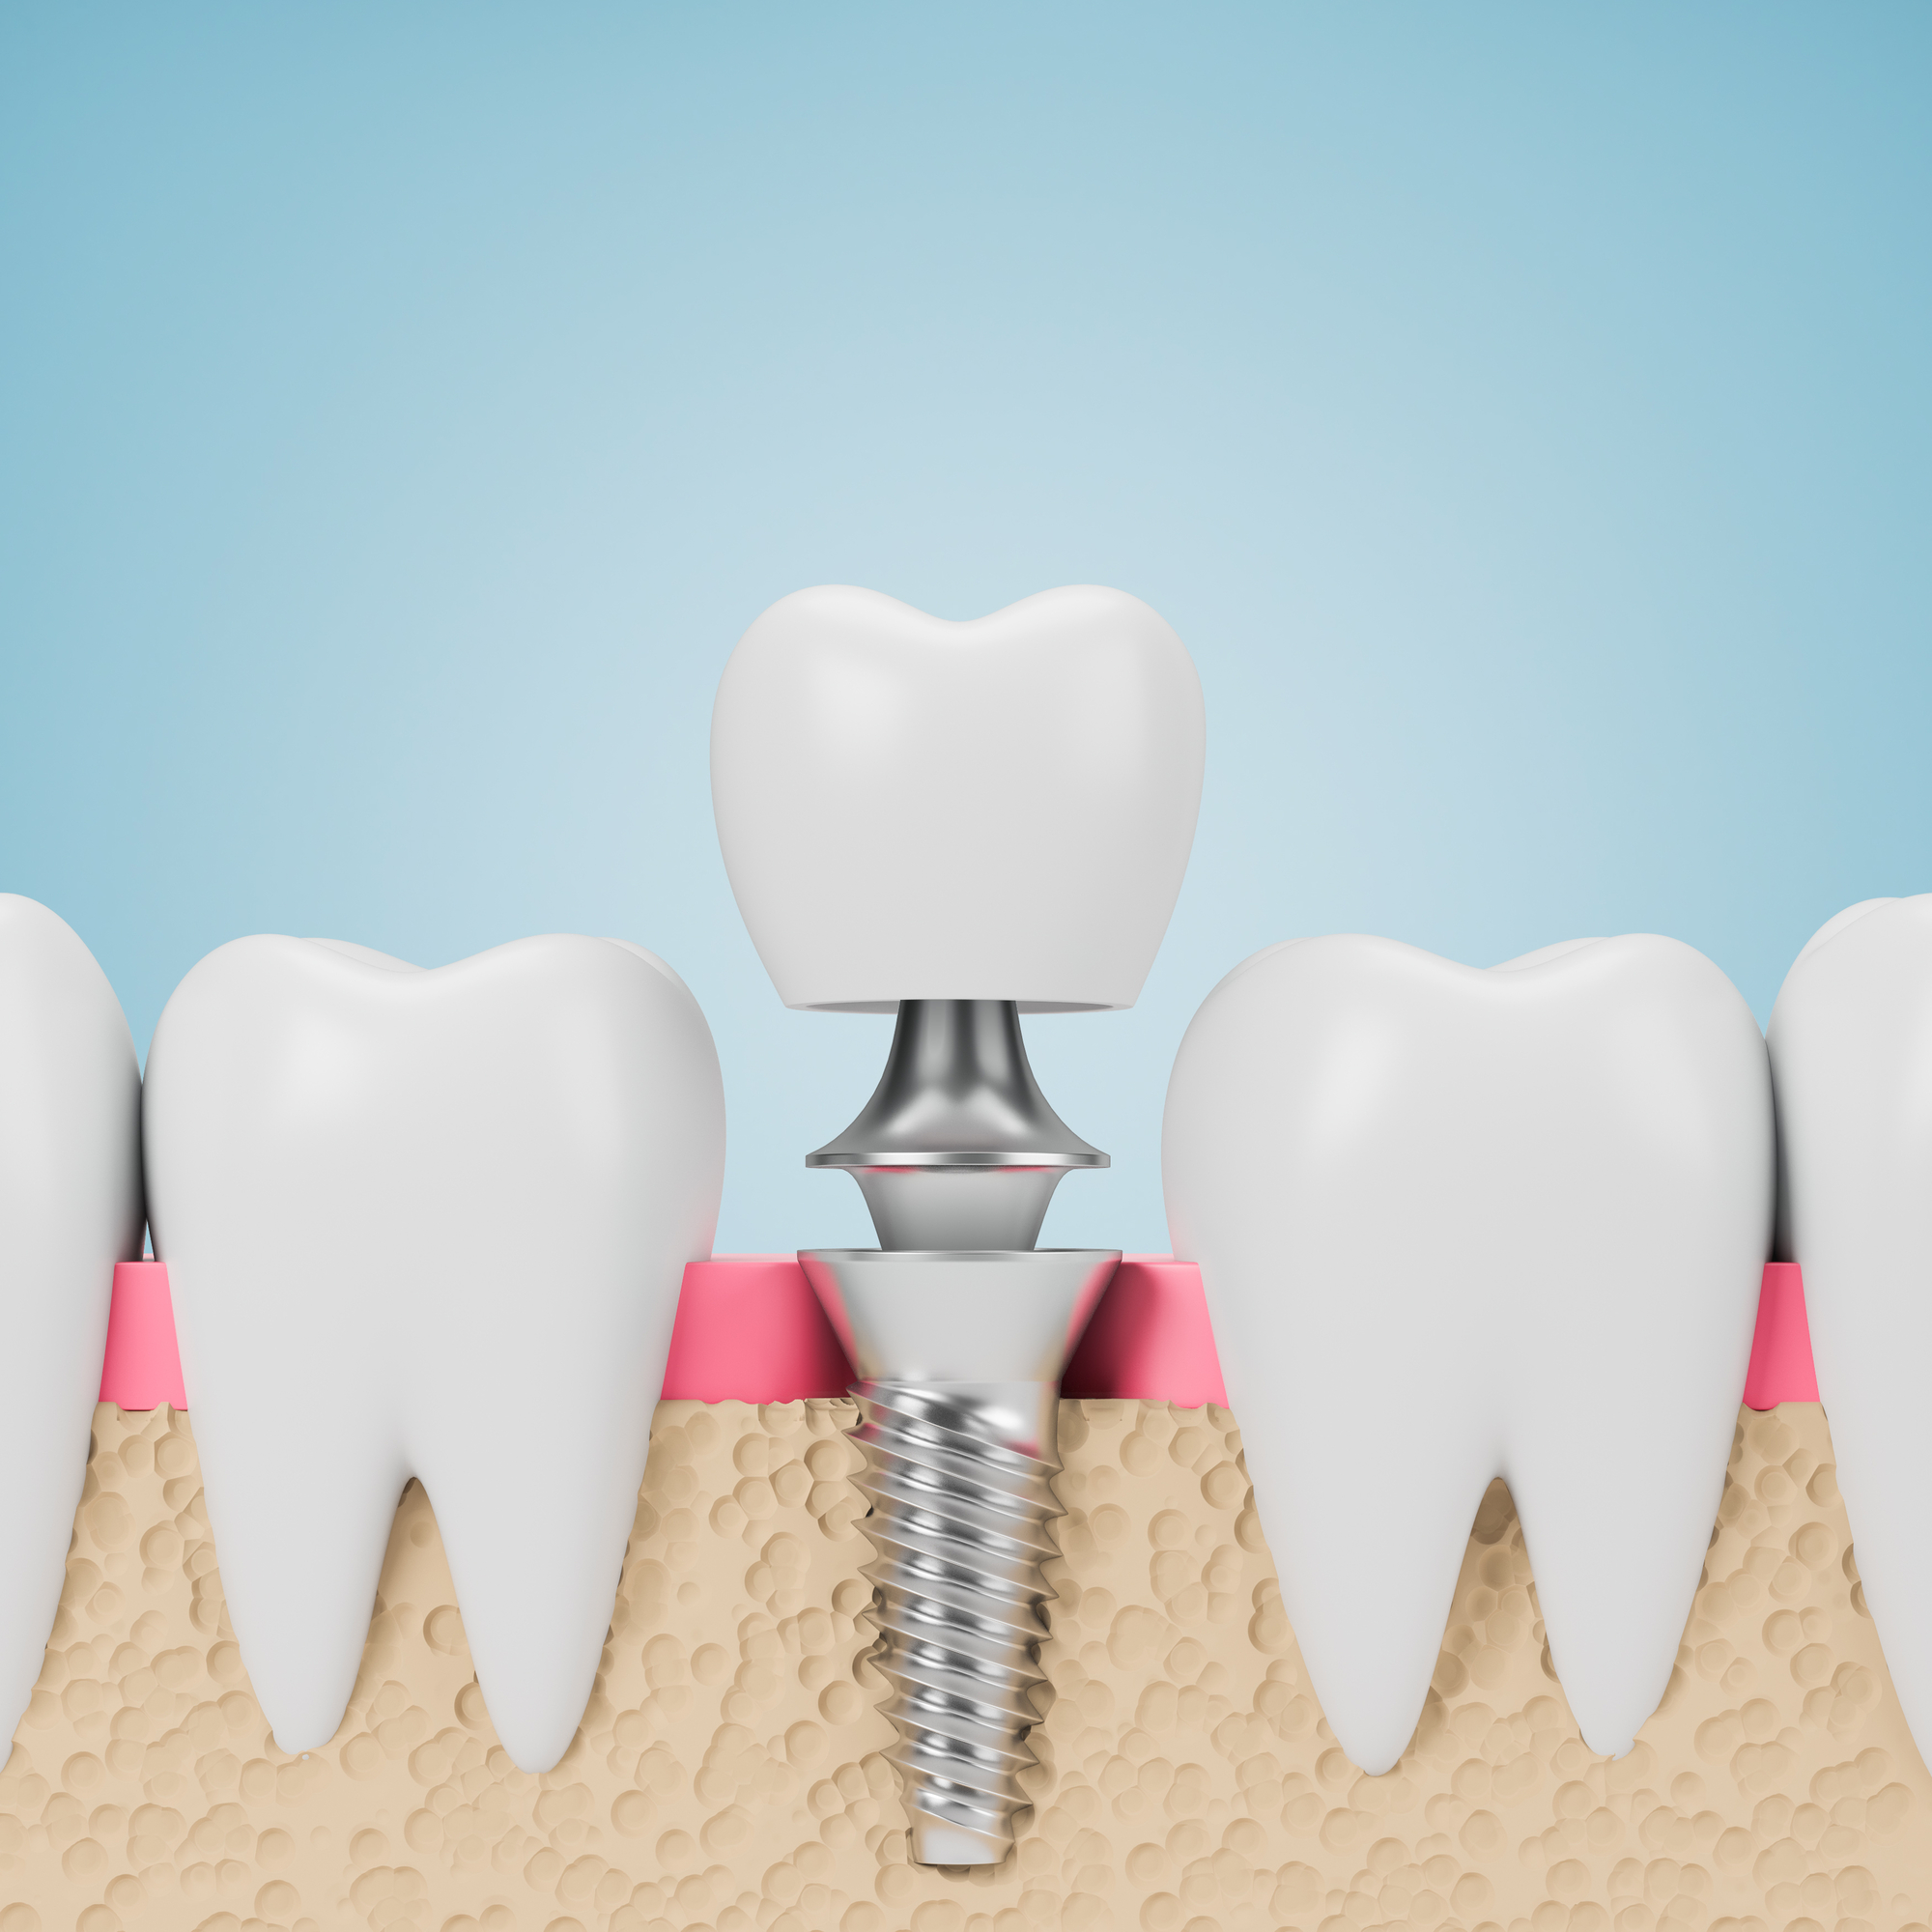 Row of teeth with dental implant screw over blue background. Concept of dental hygiene and care. 3d rendering